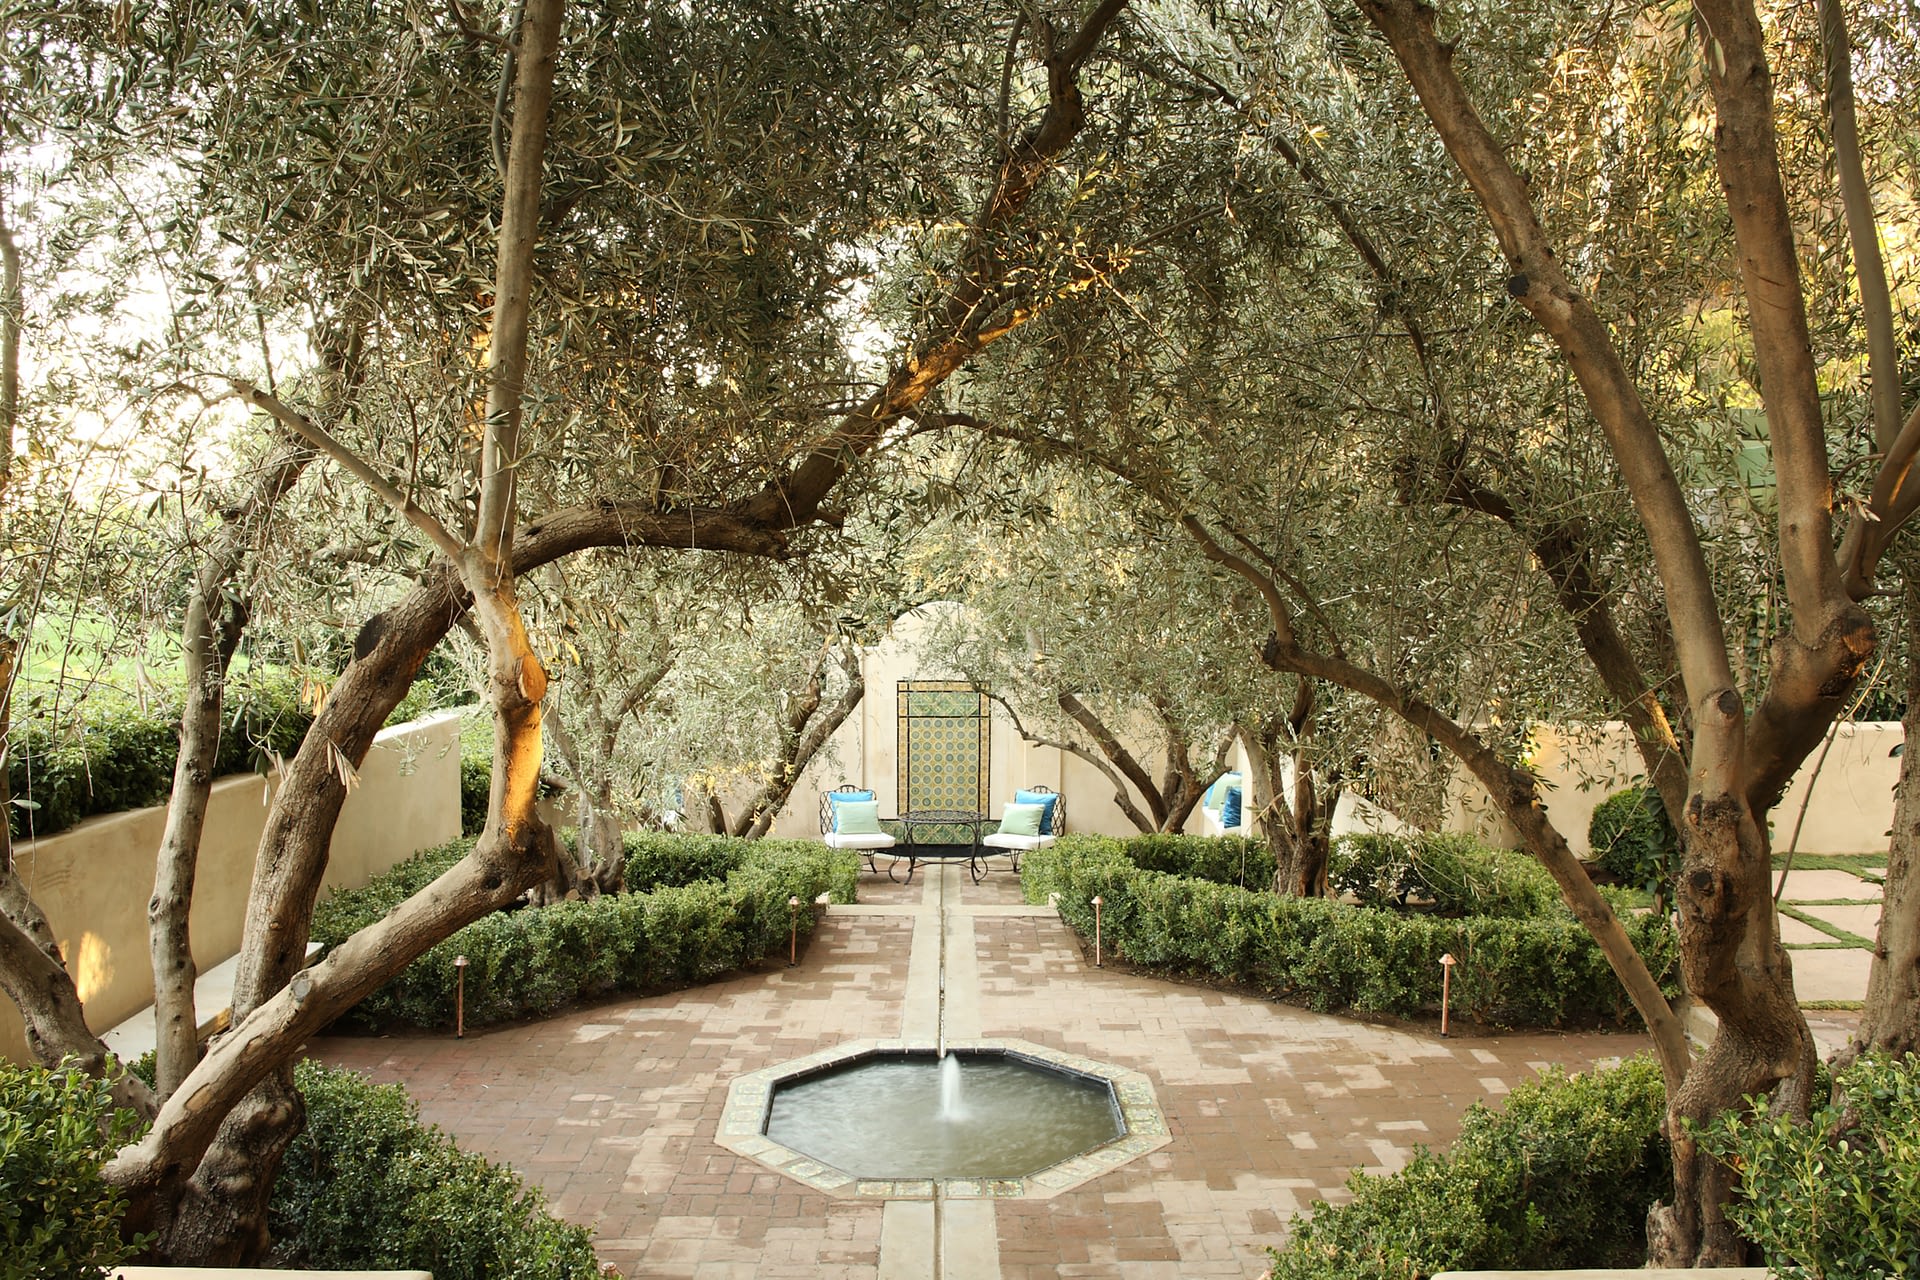 South Pasadena - Newly-planted ancient olive grove in the water garden